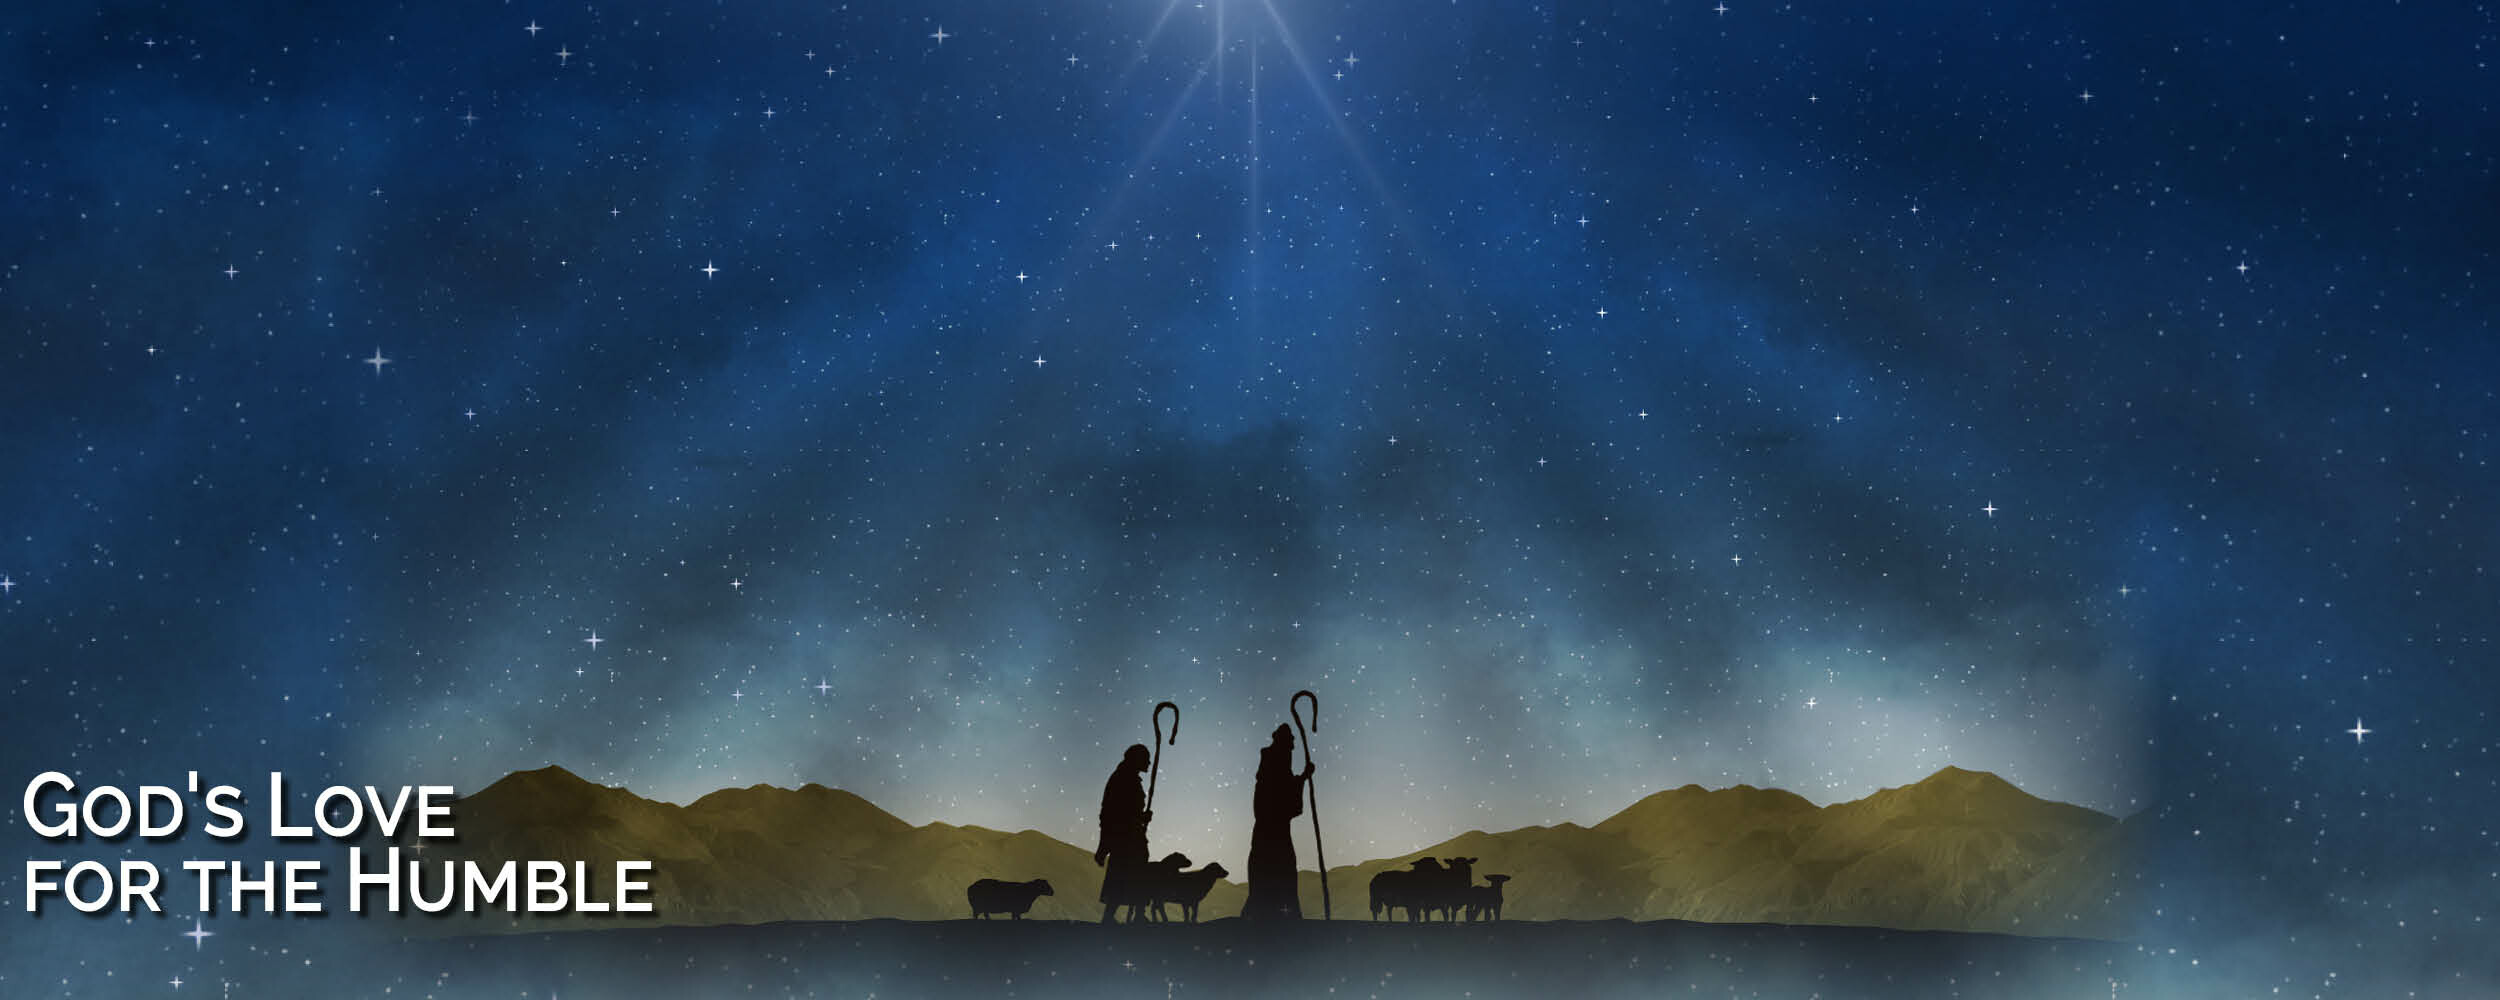 God's Love for the Humble, Children's Christmas Message